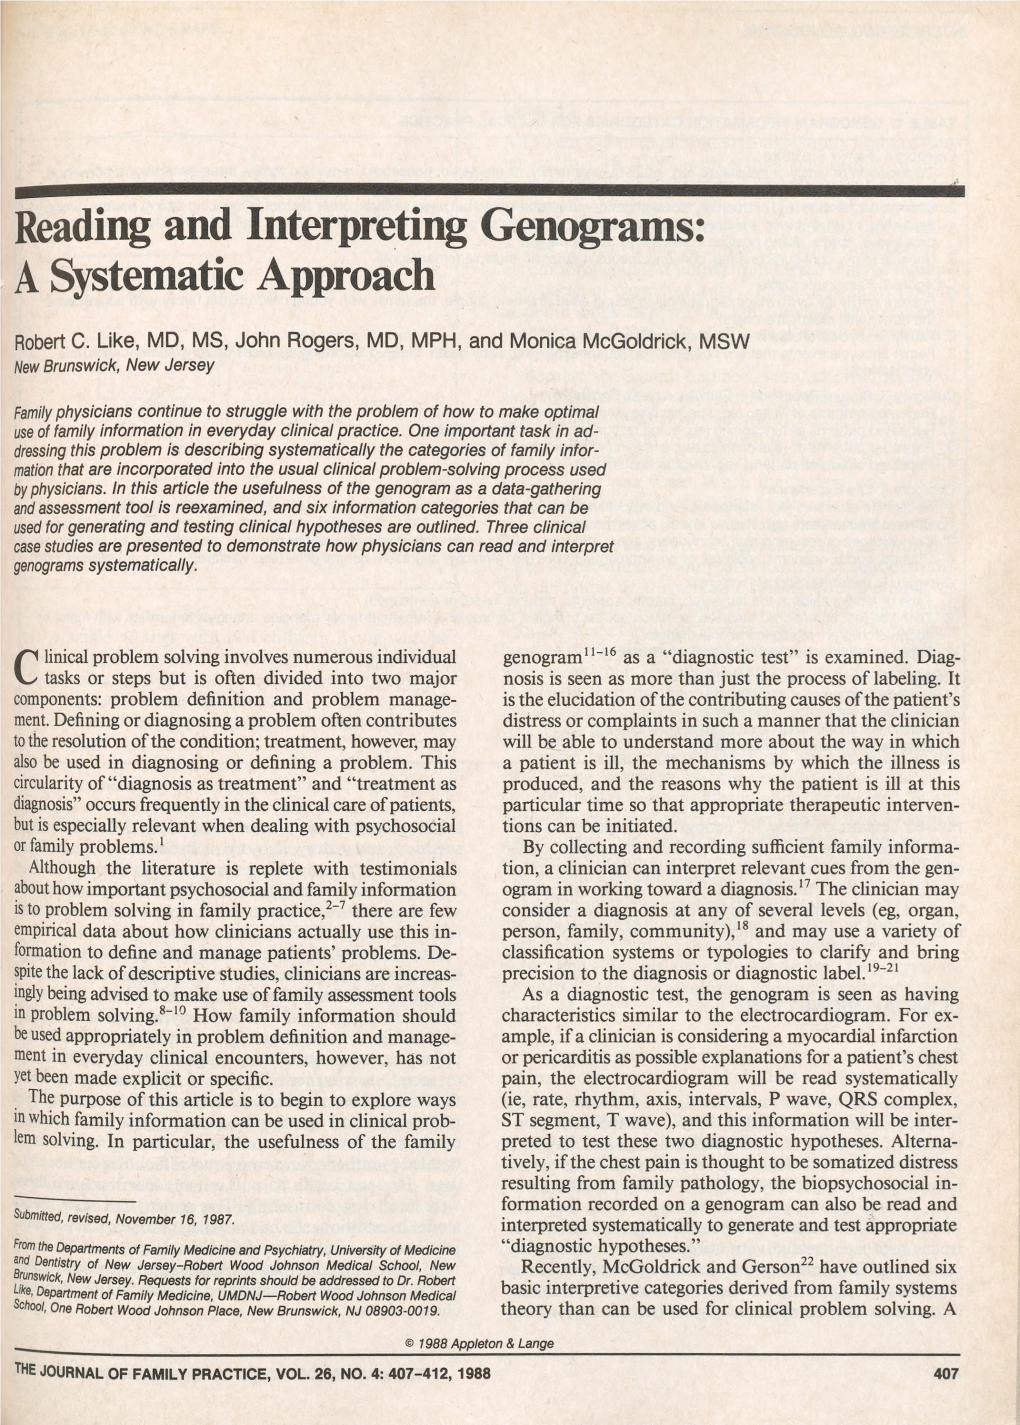 Reading and Interpreting Genograms: a Systematic Approach